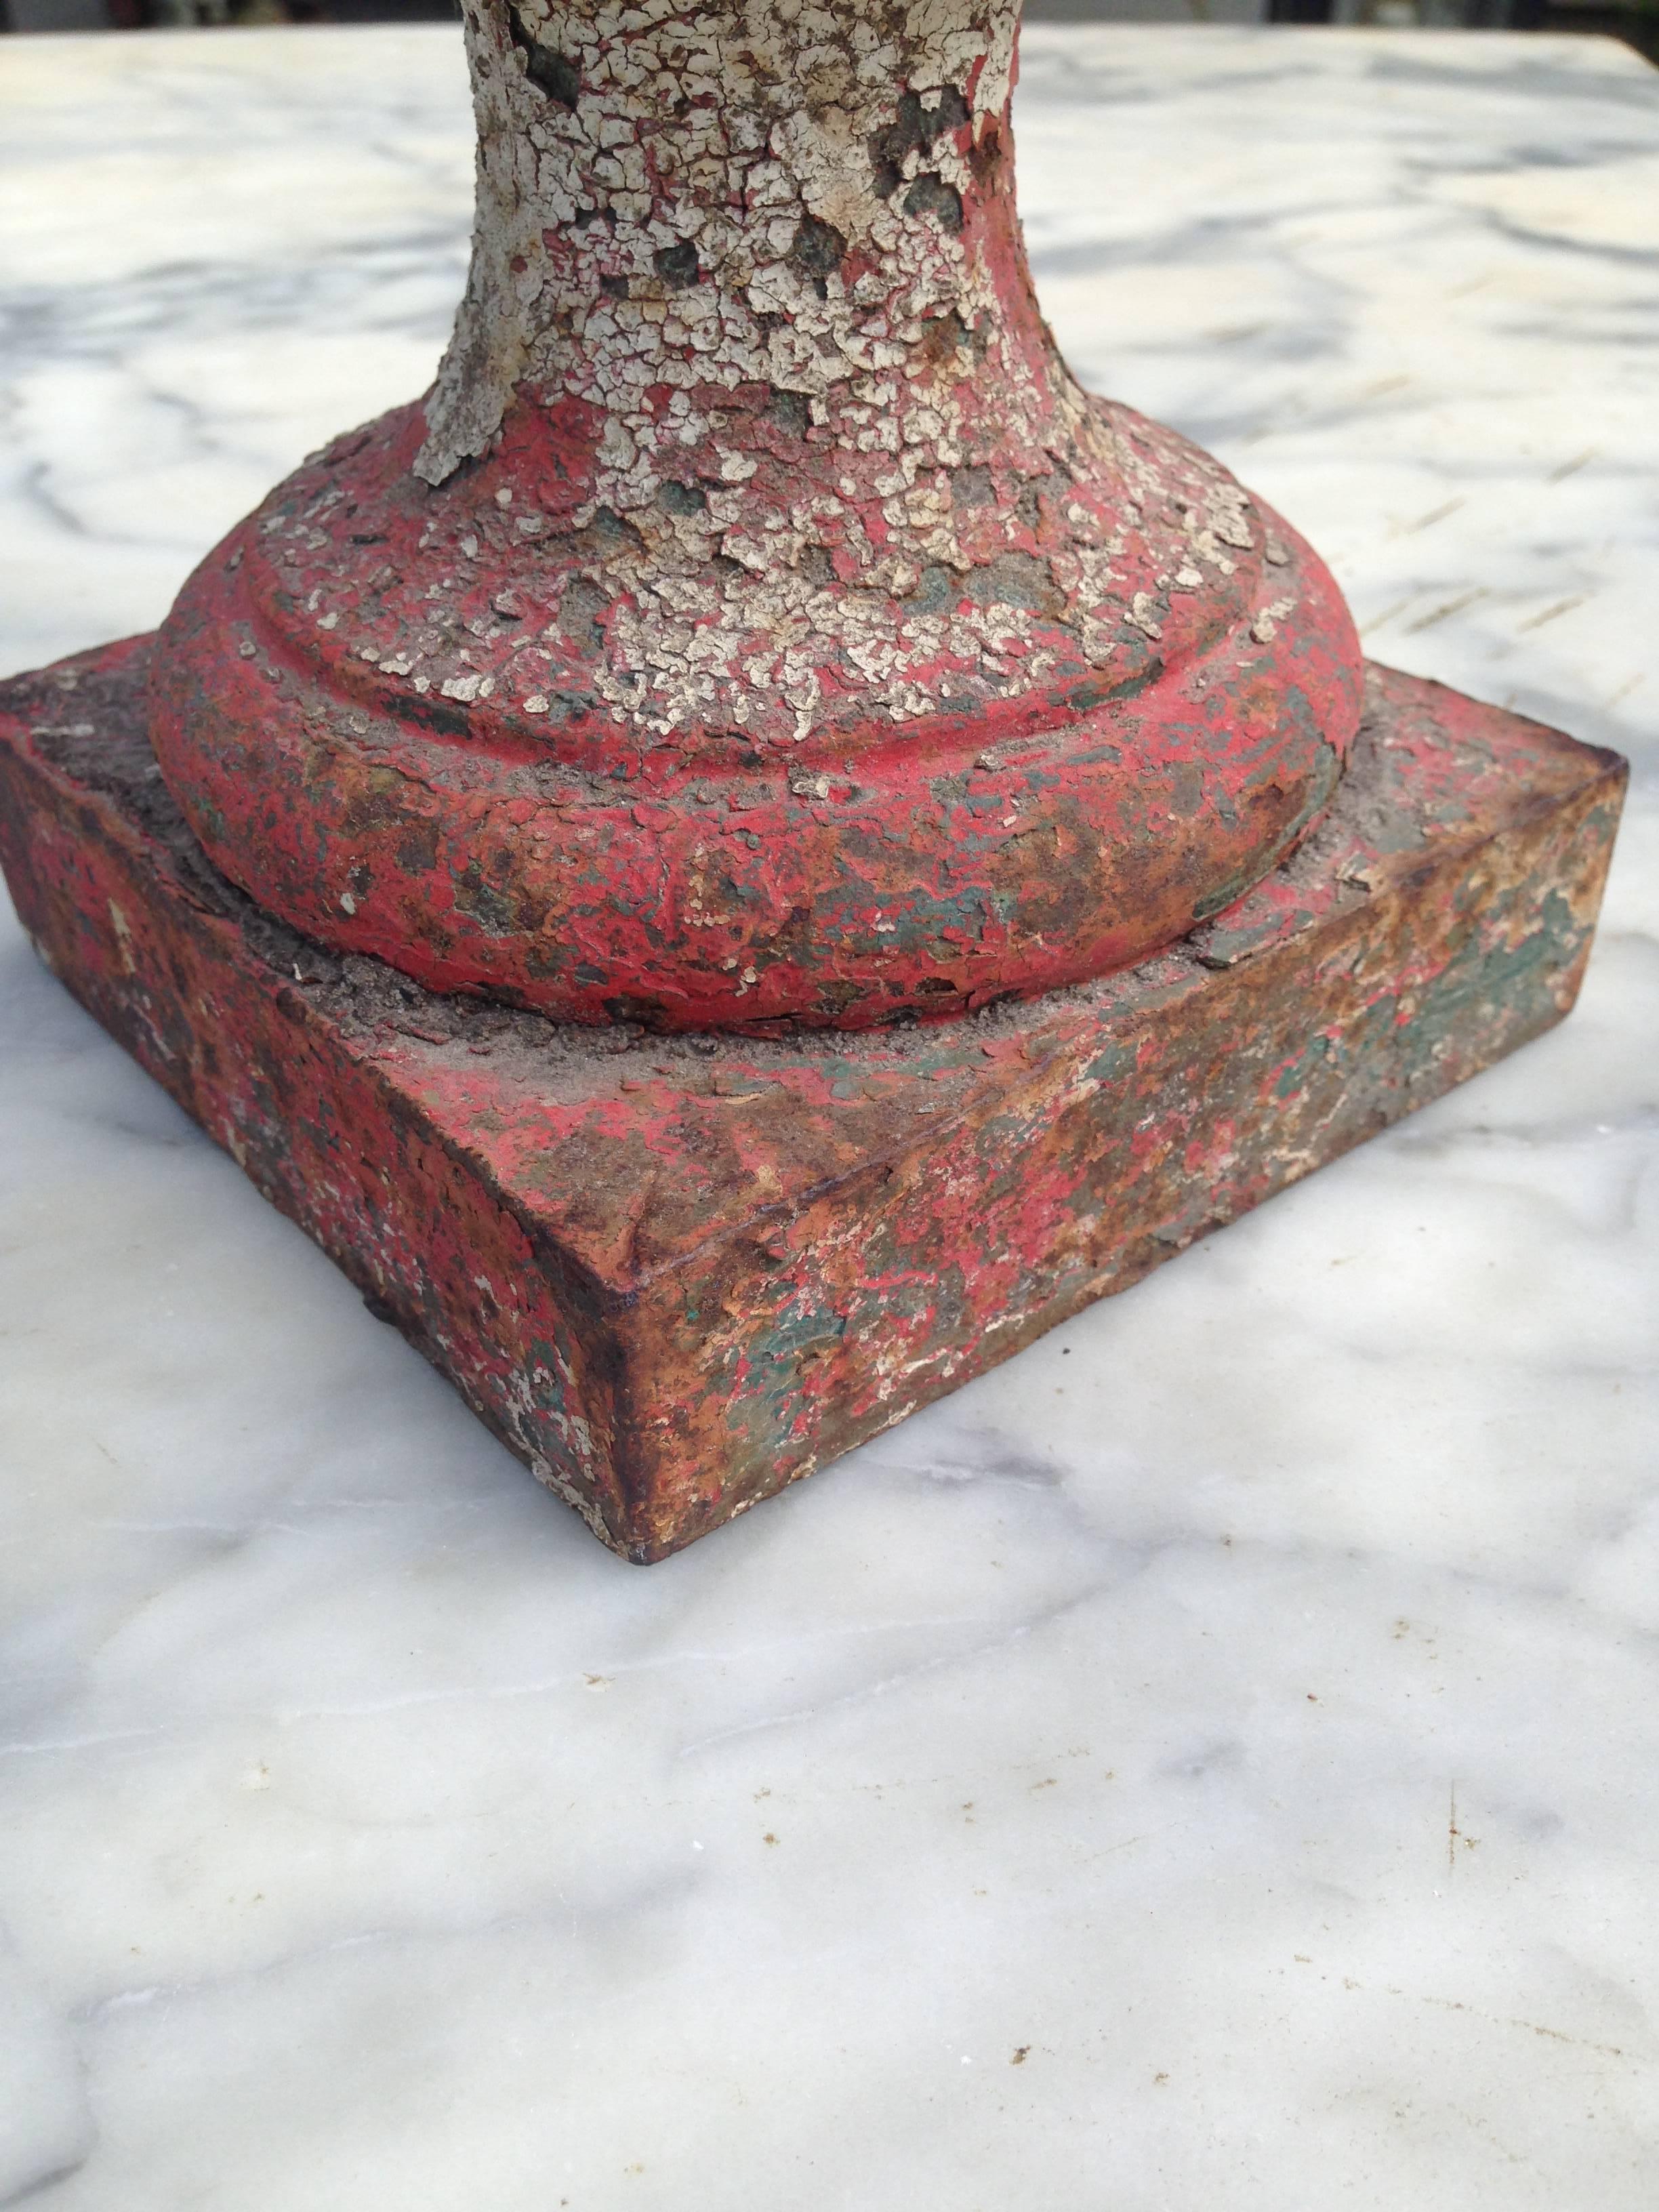 A French cast iron garden urn showing several layers of old paint (red, blue and white). Suitable for the garden or interior. 